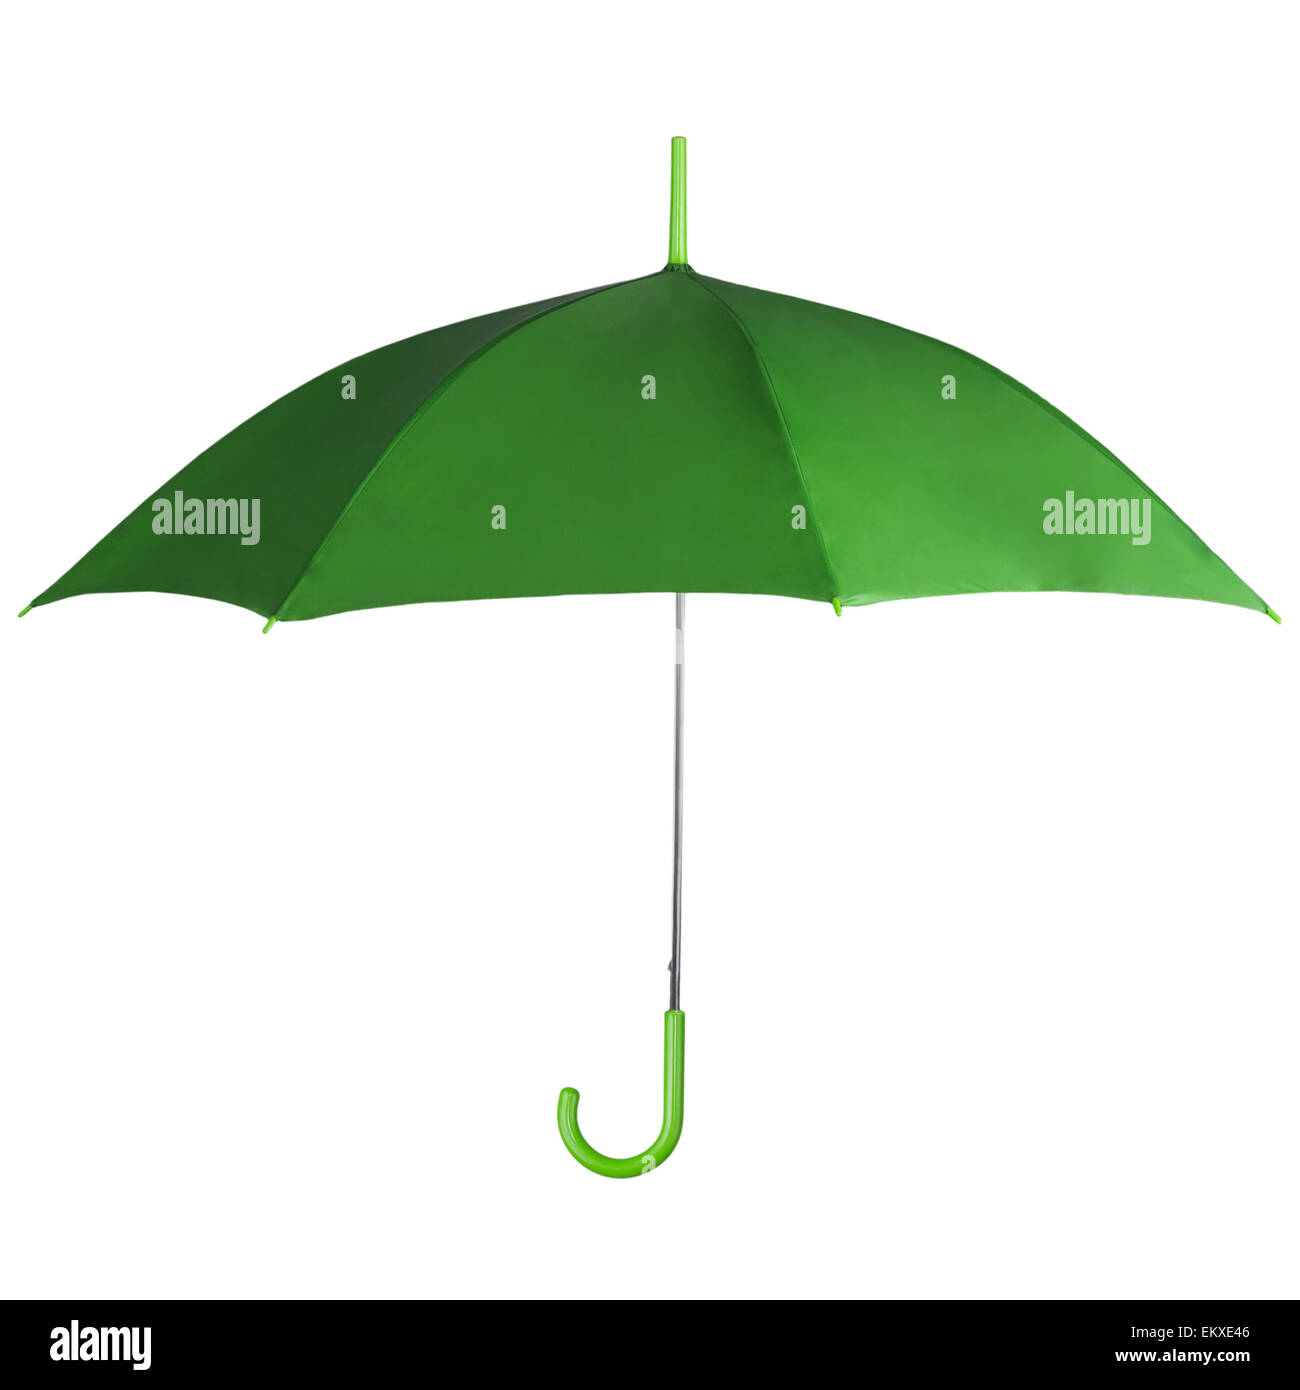 Large Umbrella High Resolution Stock Photography and Images - Alamy